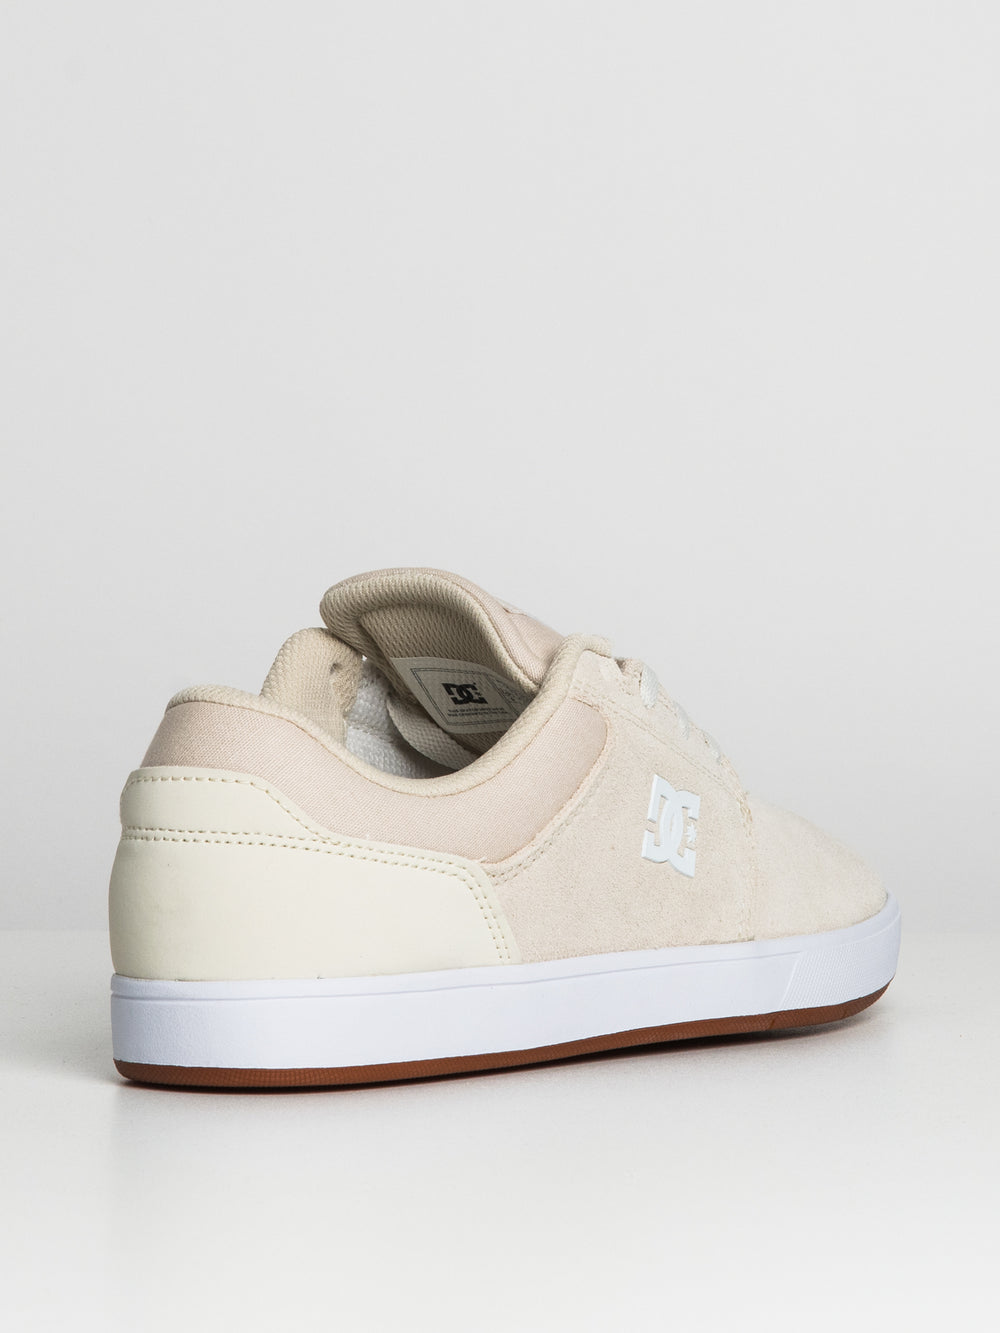 MENS DC SHOES CRISIS 2 Boathouse | Footwear Collective